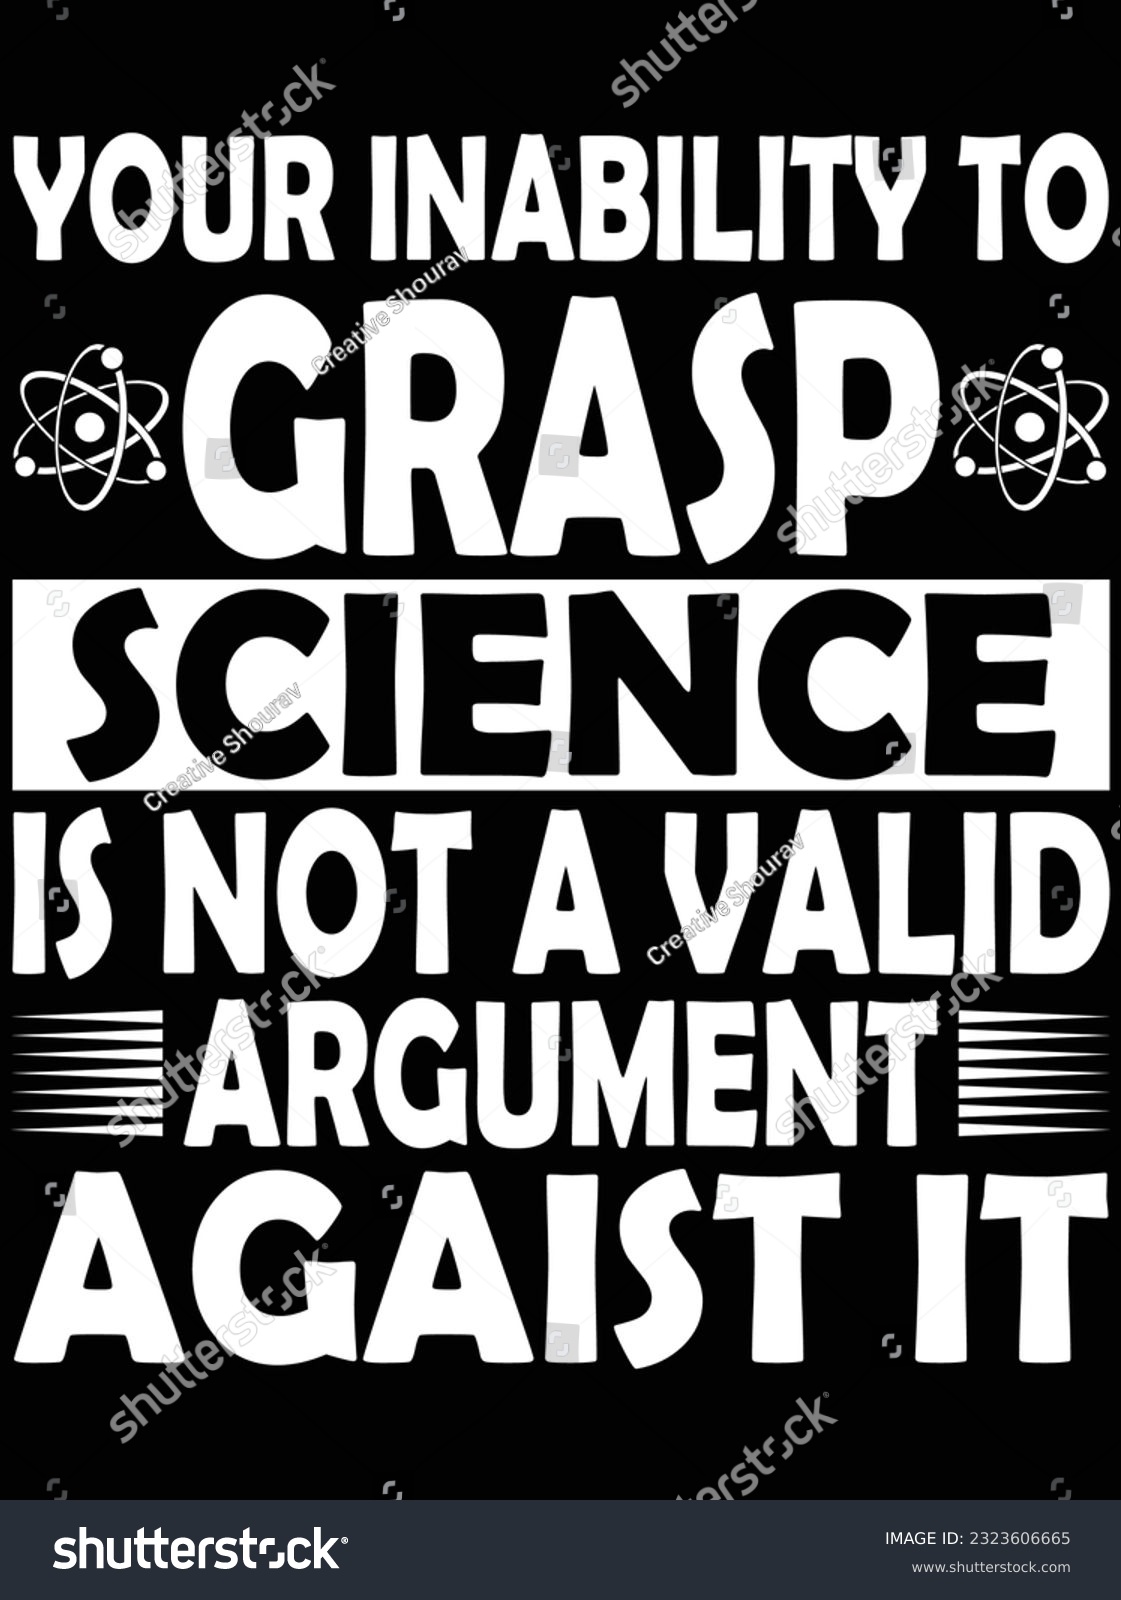 SVG of Your inability to grasp science is not a valid vector art design, eps file. design file for t-shirt. SVG, EPS cuttable design file svg